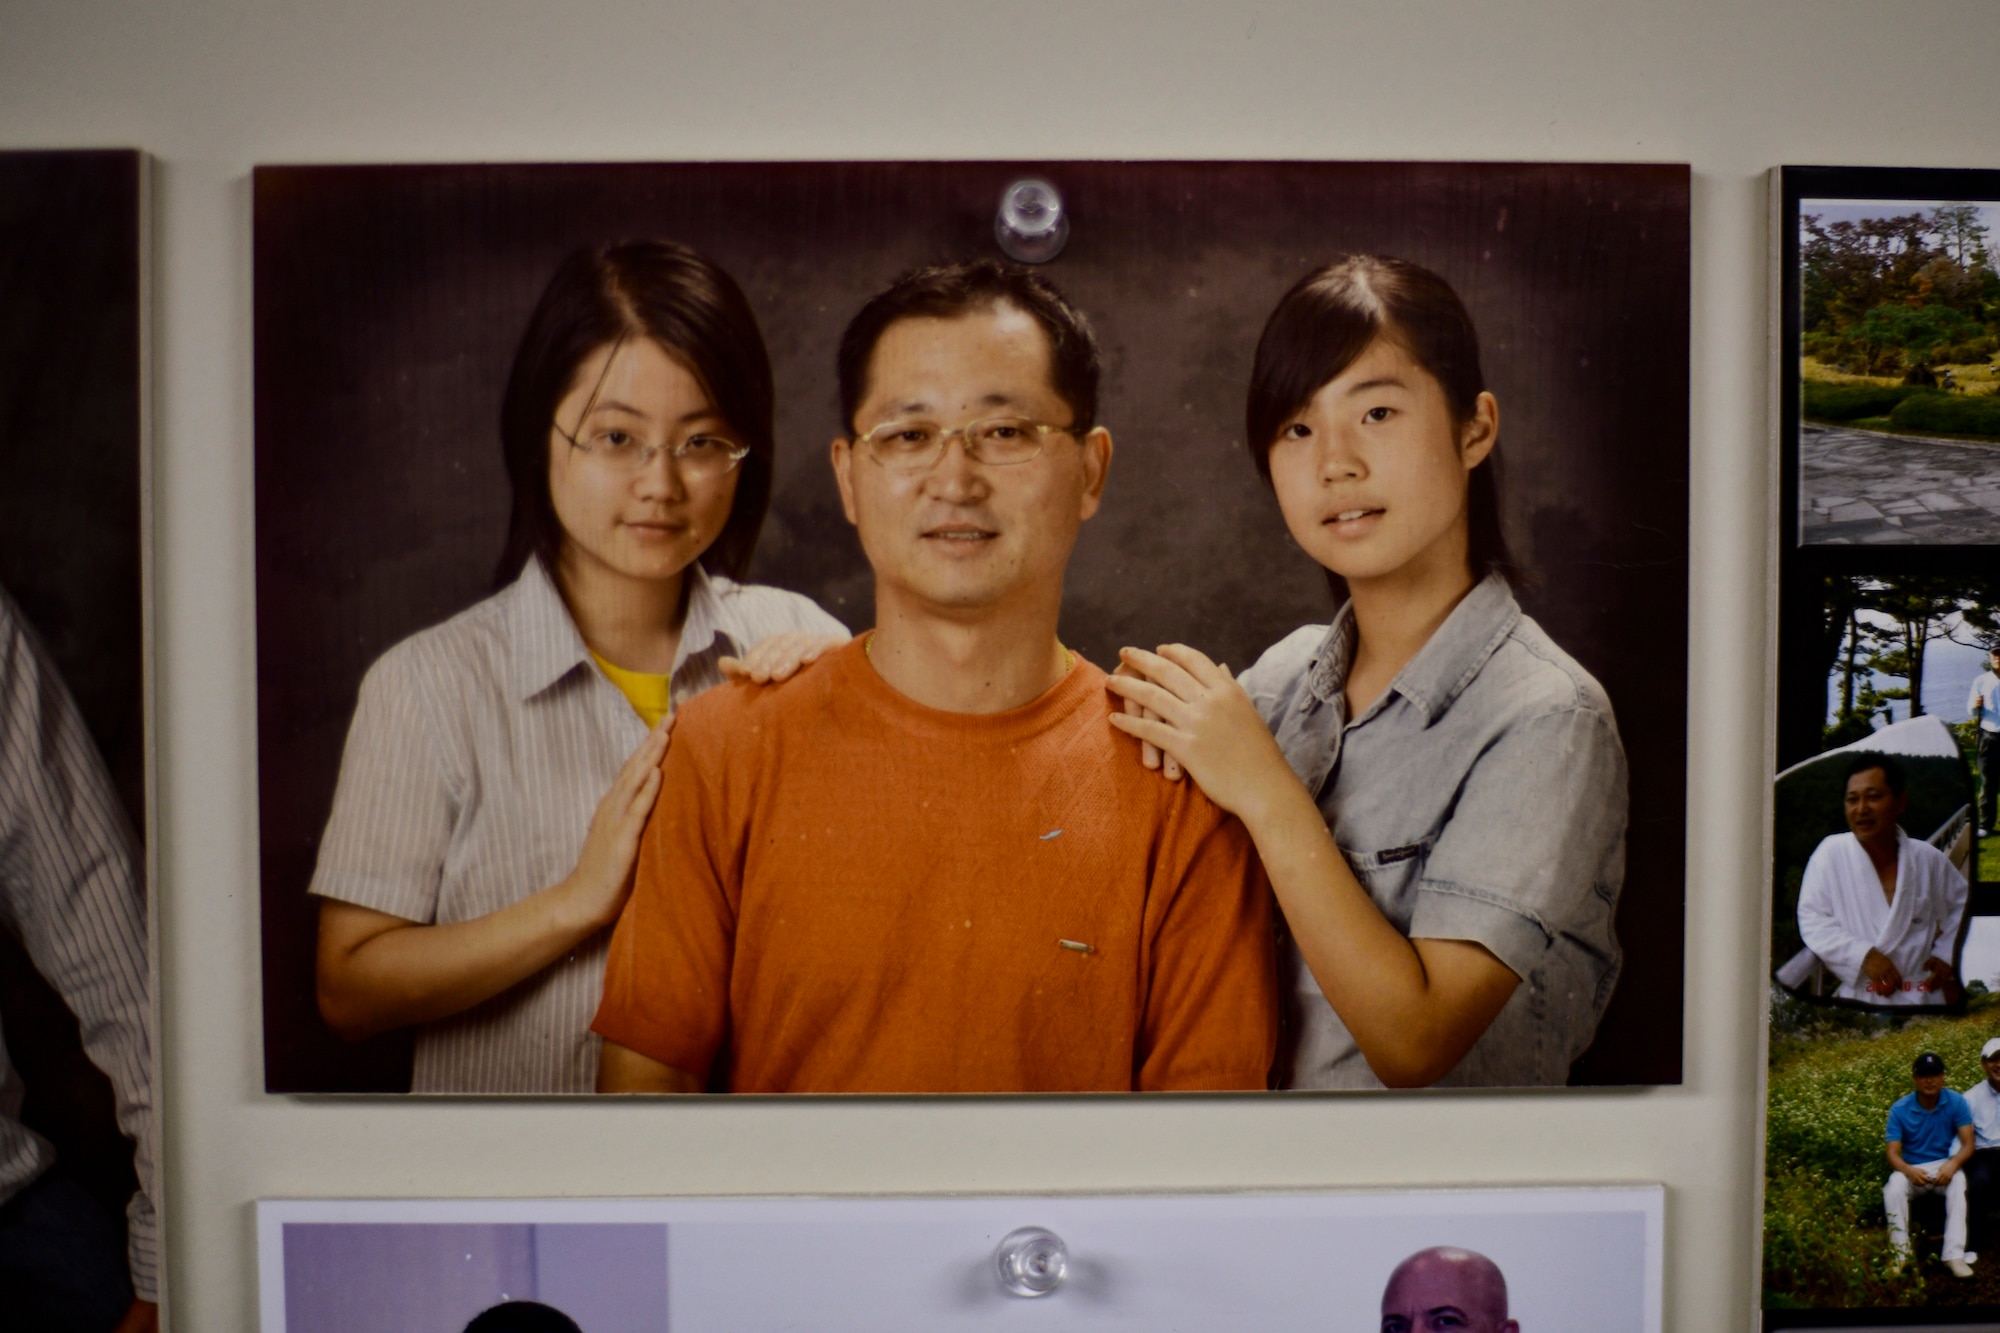 A photo of a graphics technician and his daughters hangs on the wall.